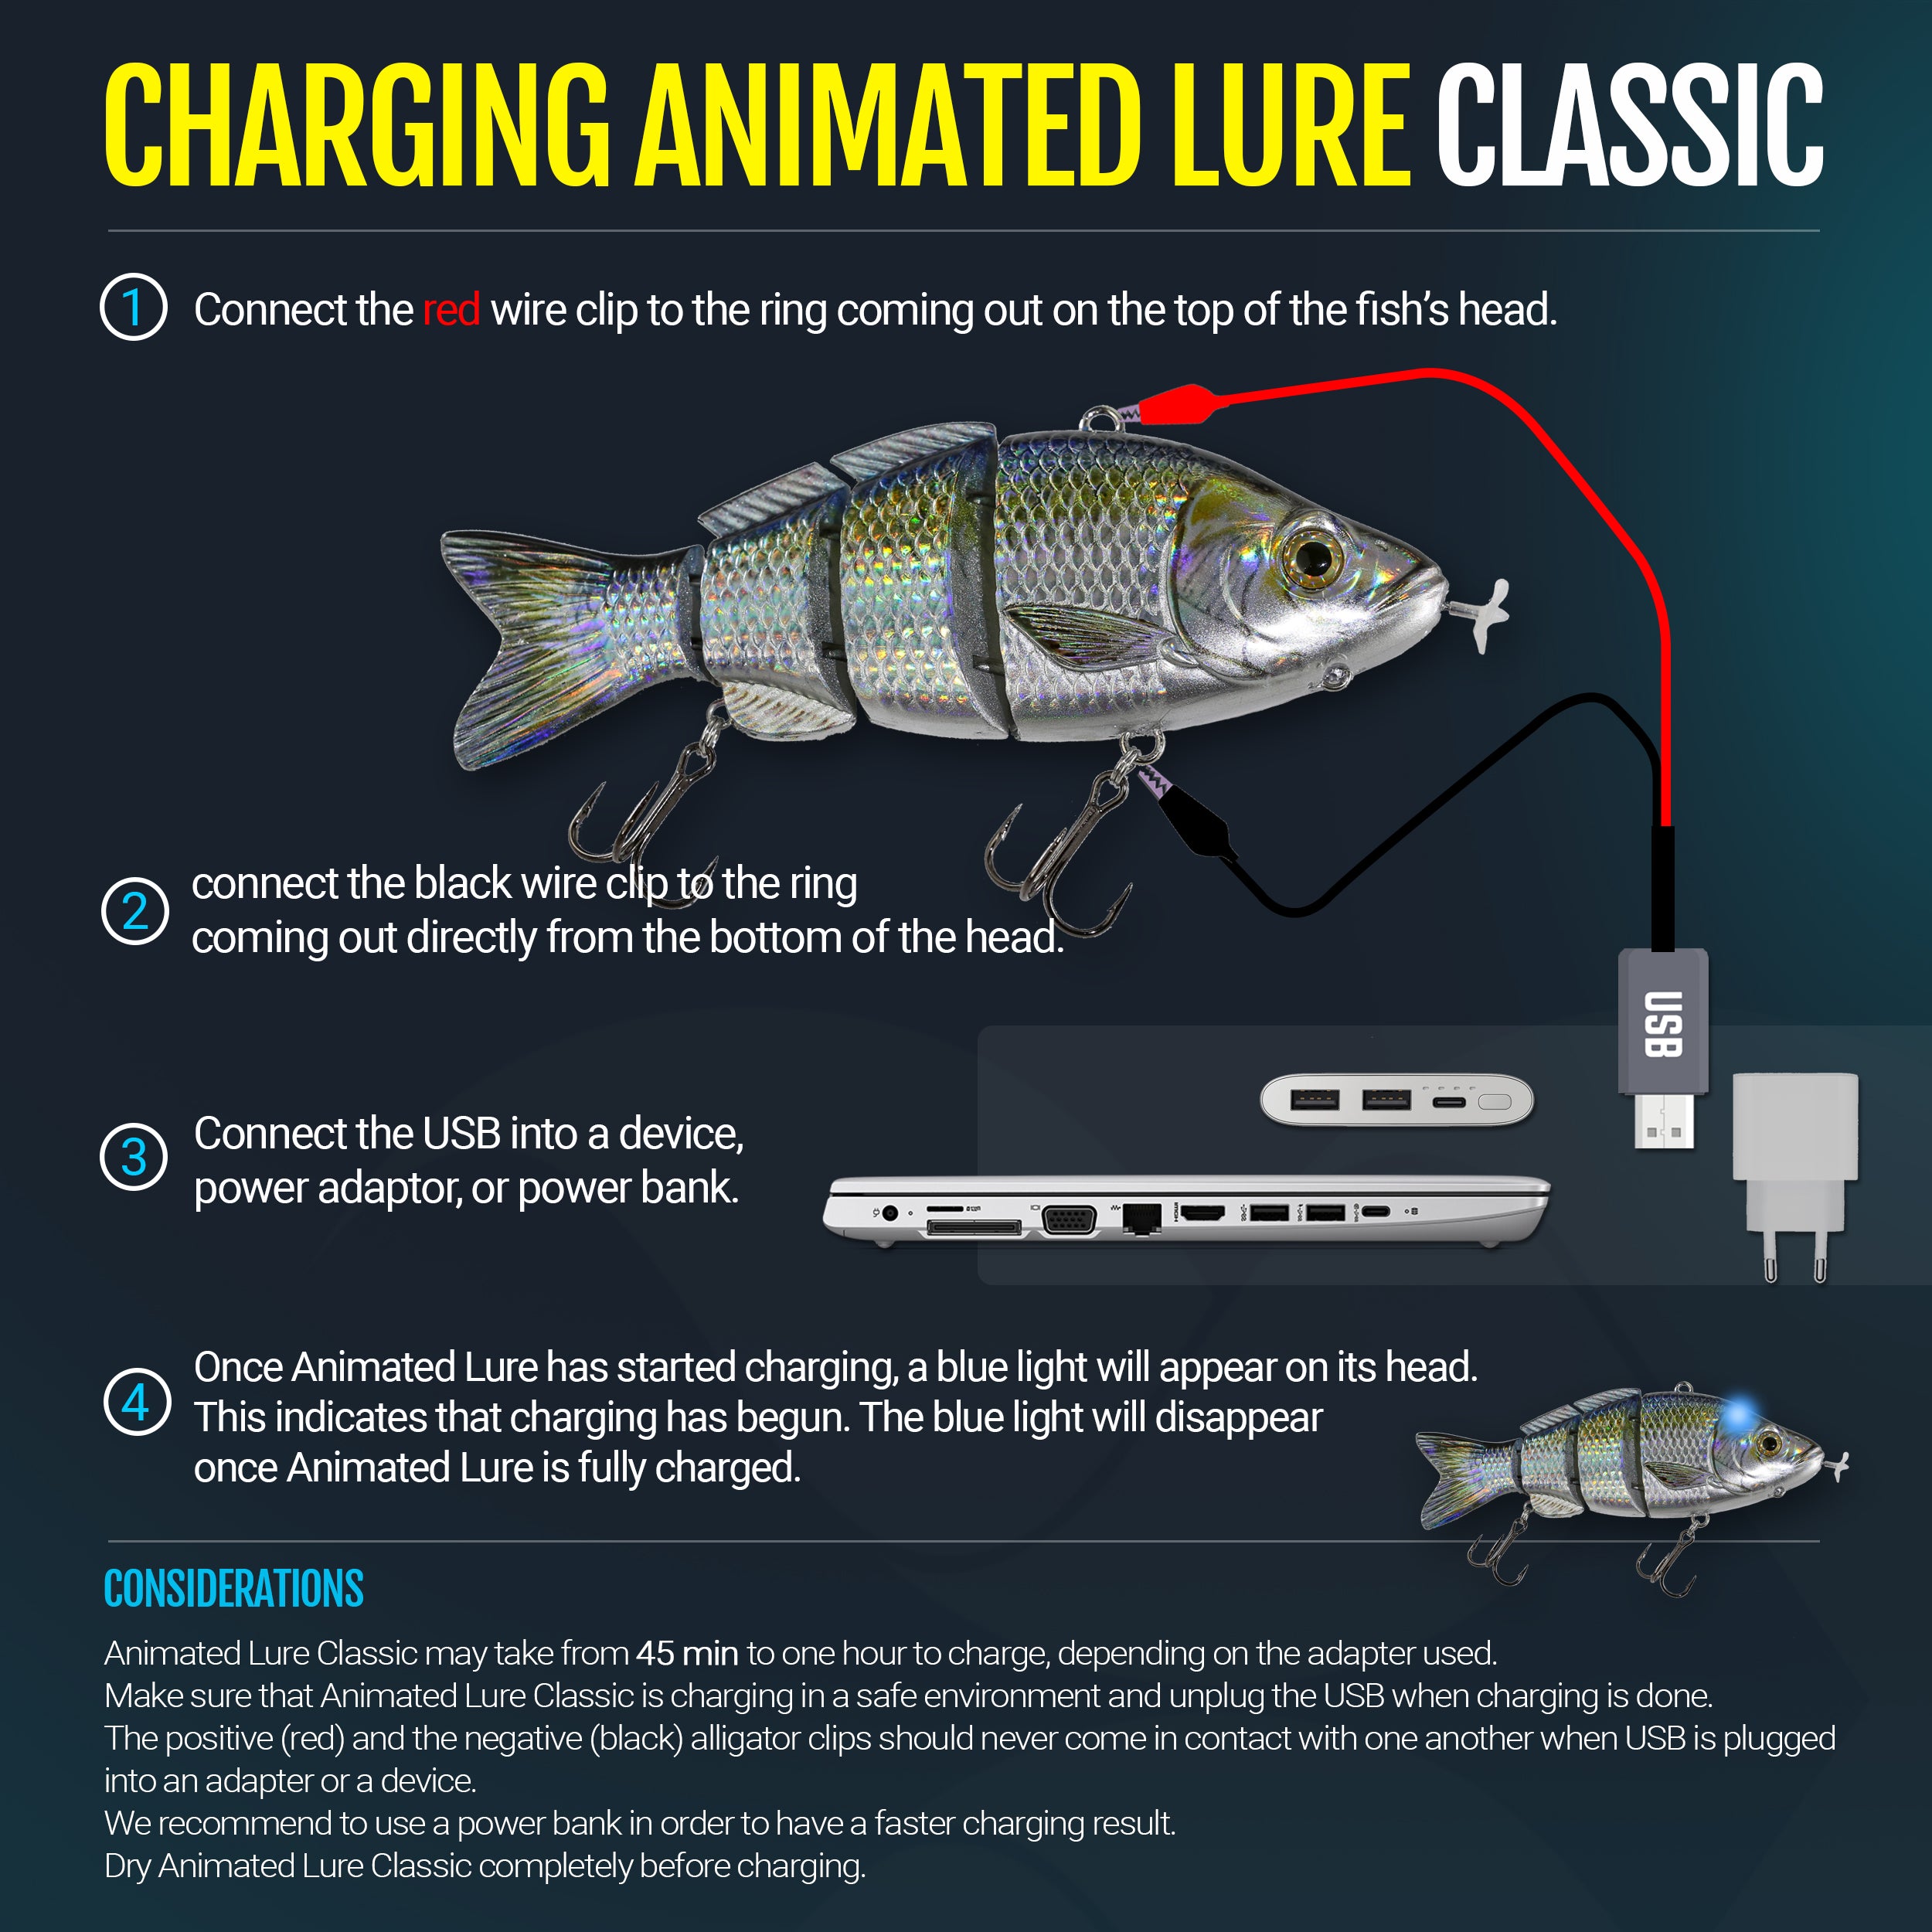 ANIMATED LURE CLASSIC CHARGING INSTRUCTION – Animated Lure